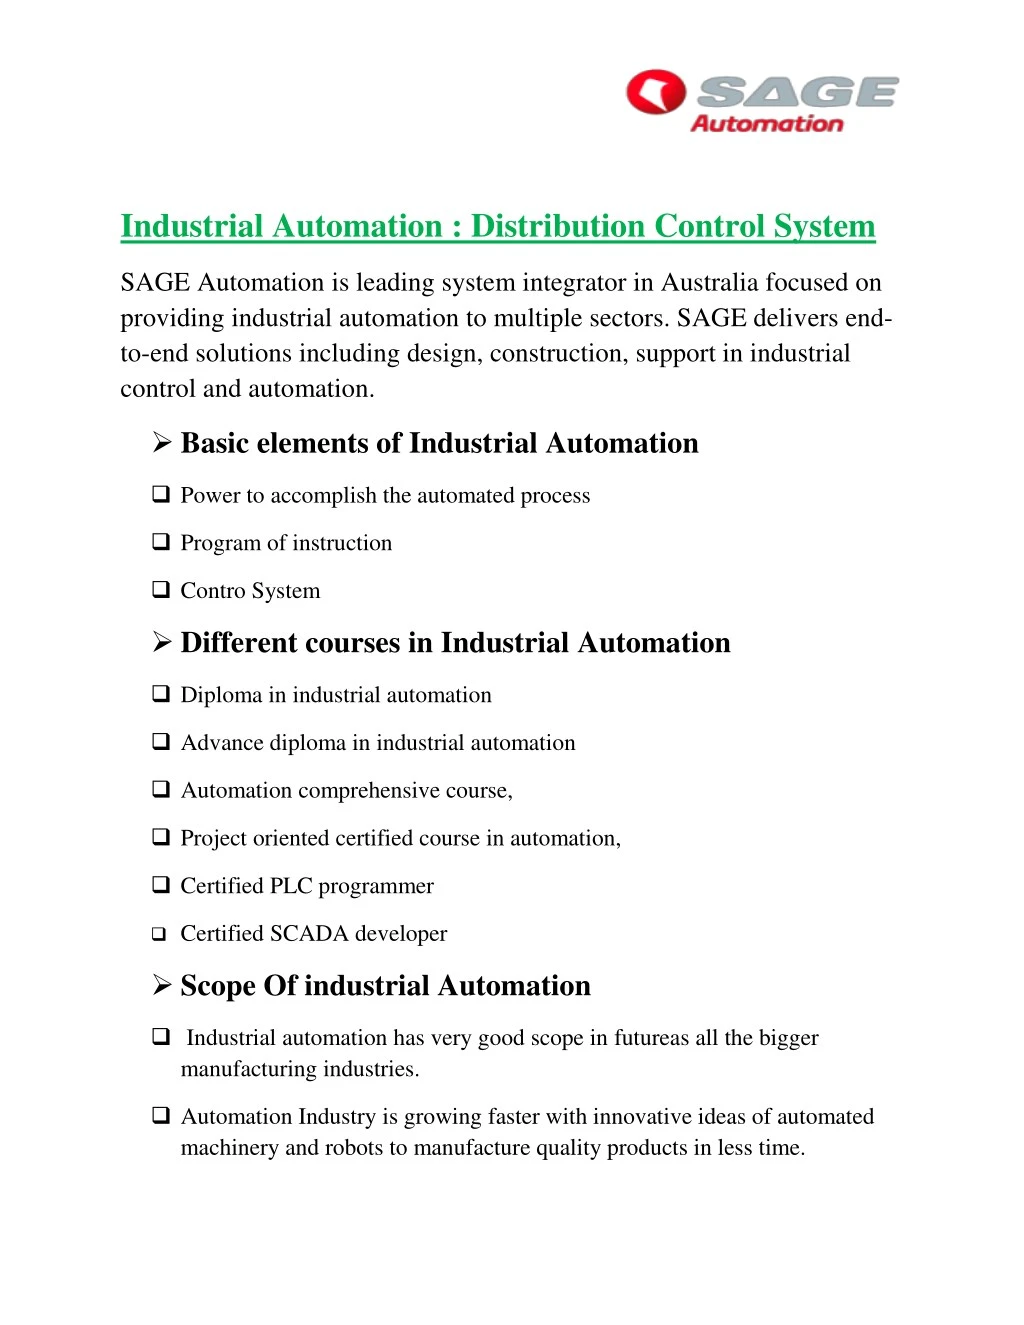 industrial automation distribution control system